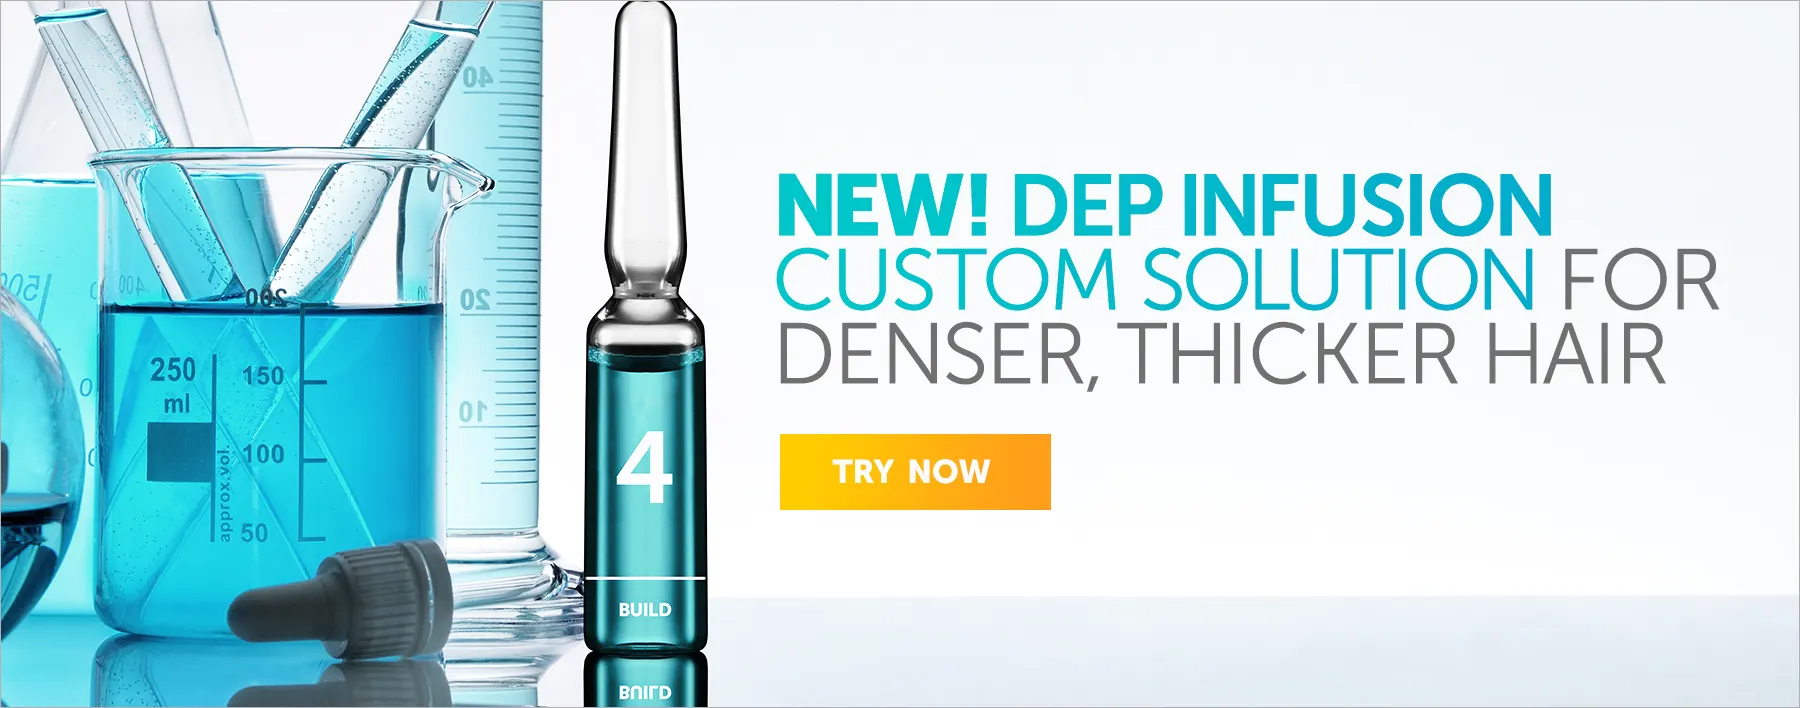 New! Dep Infusion Custom Solution for Denser, Thicker Hair